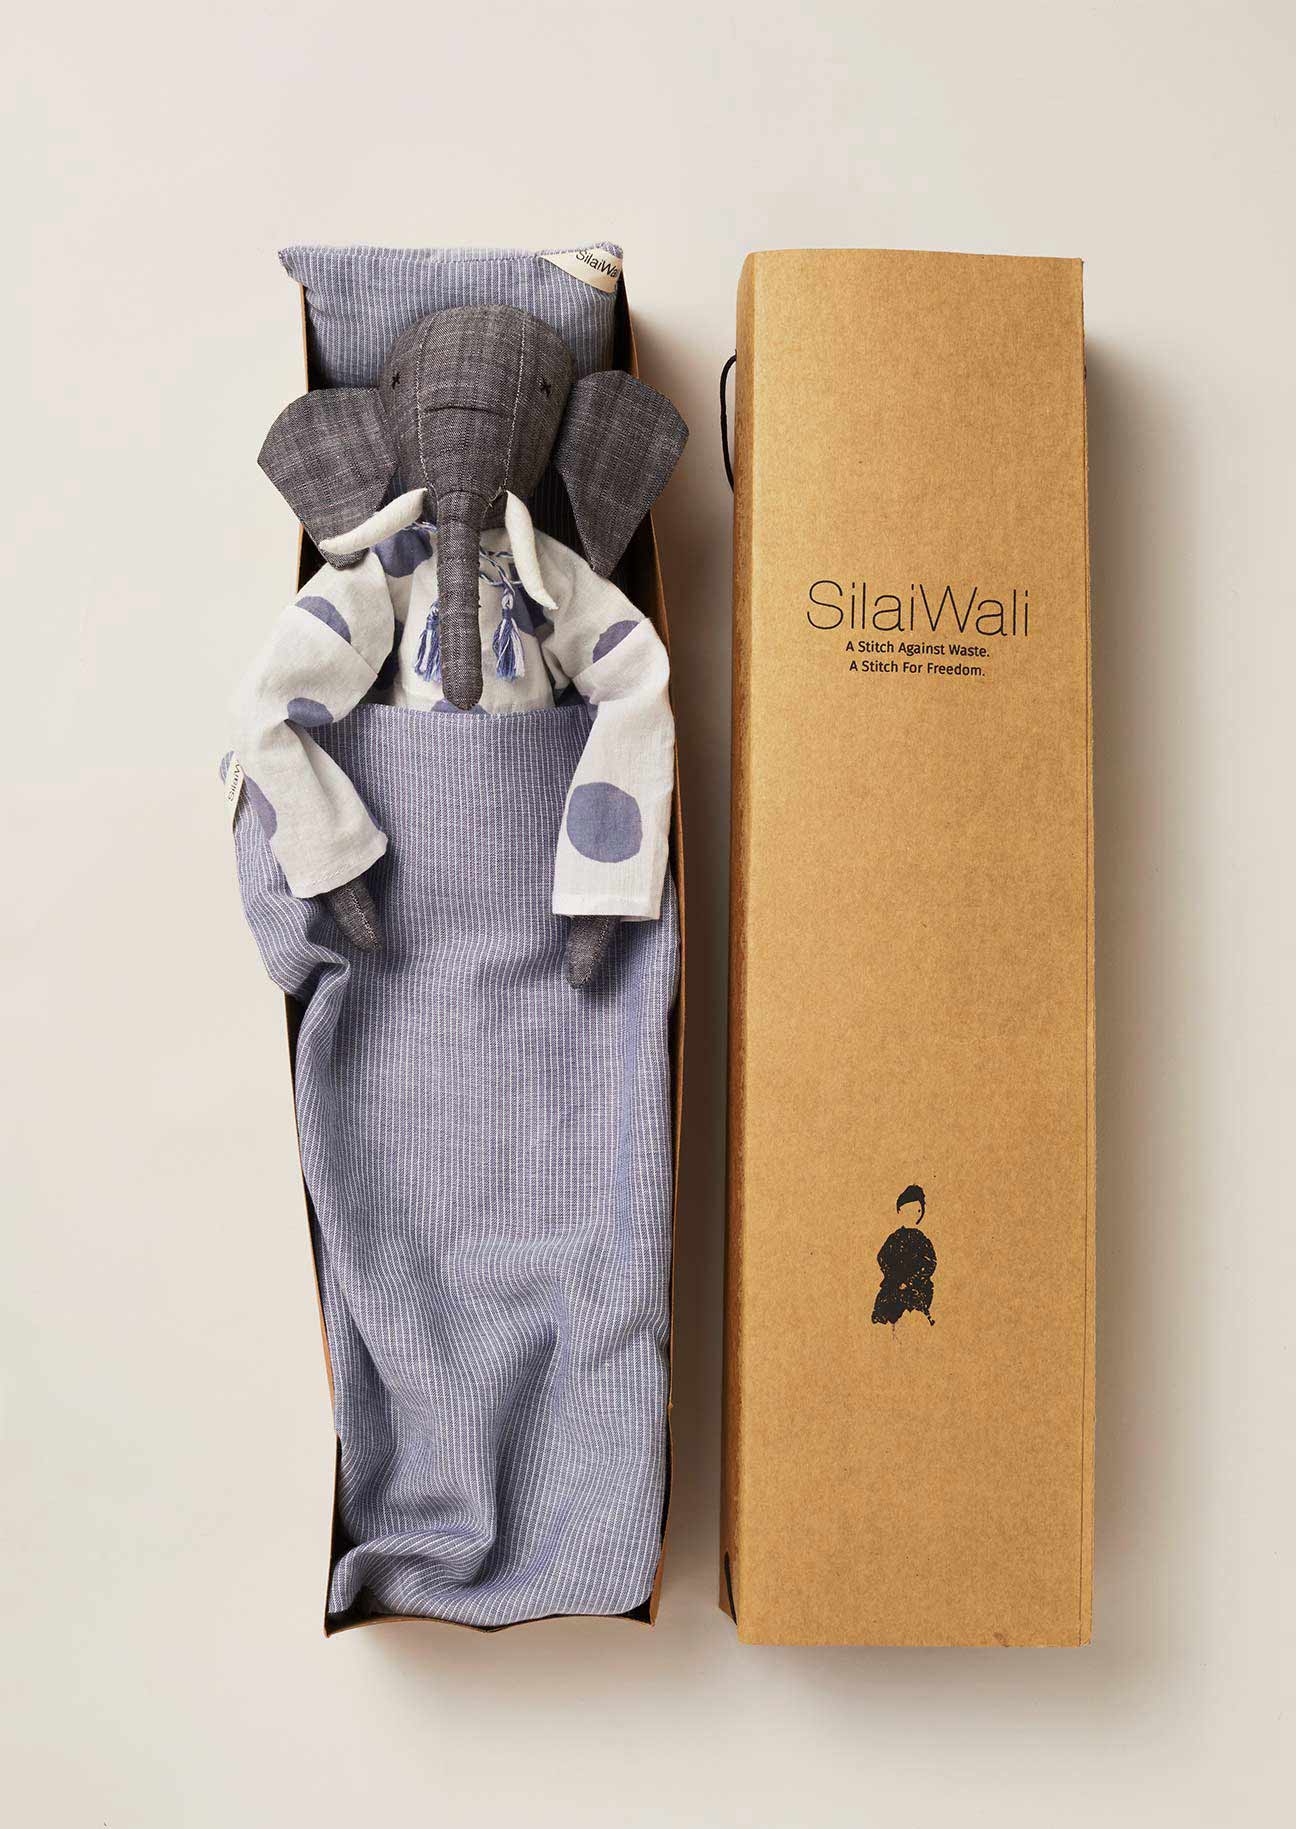 Upcycled elephant rag doll in recycled cardboard box with matching bedlinen.